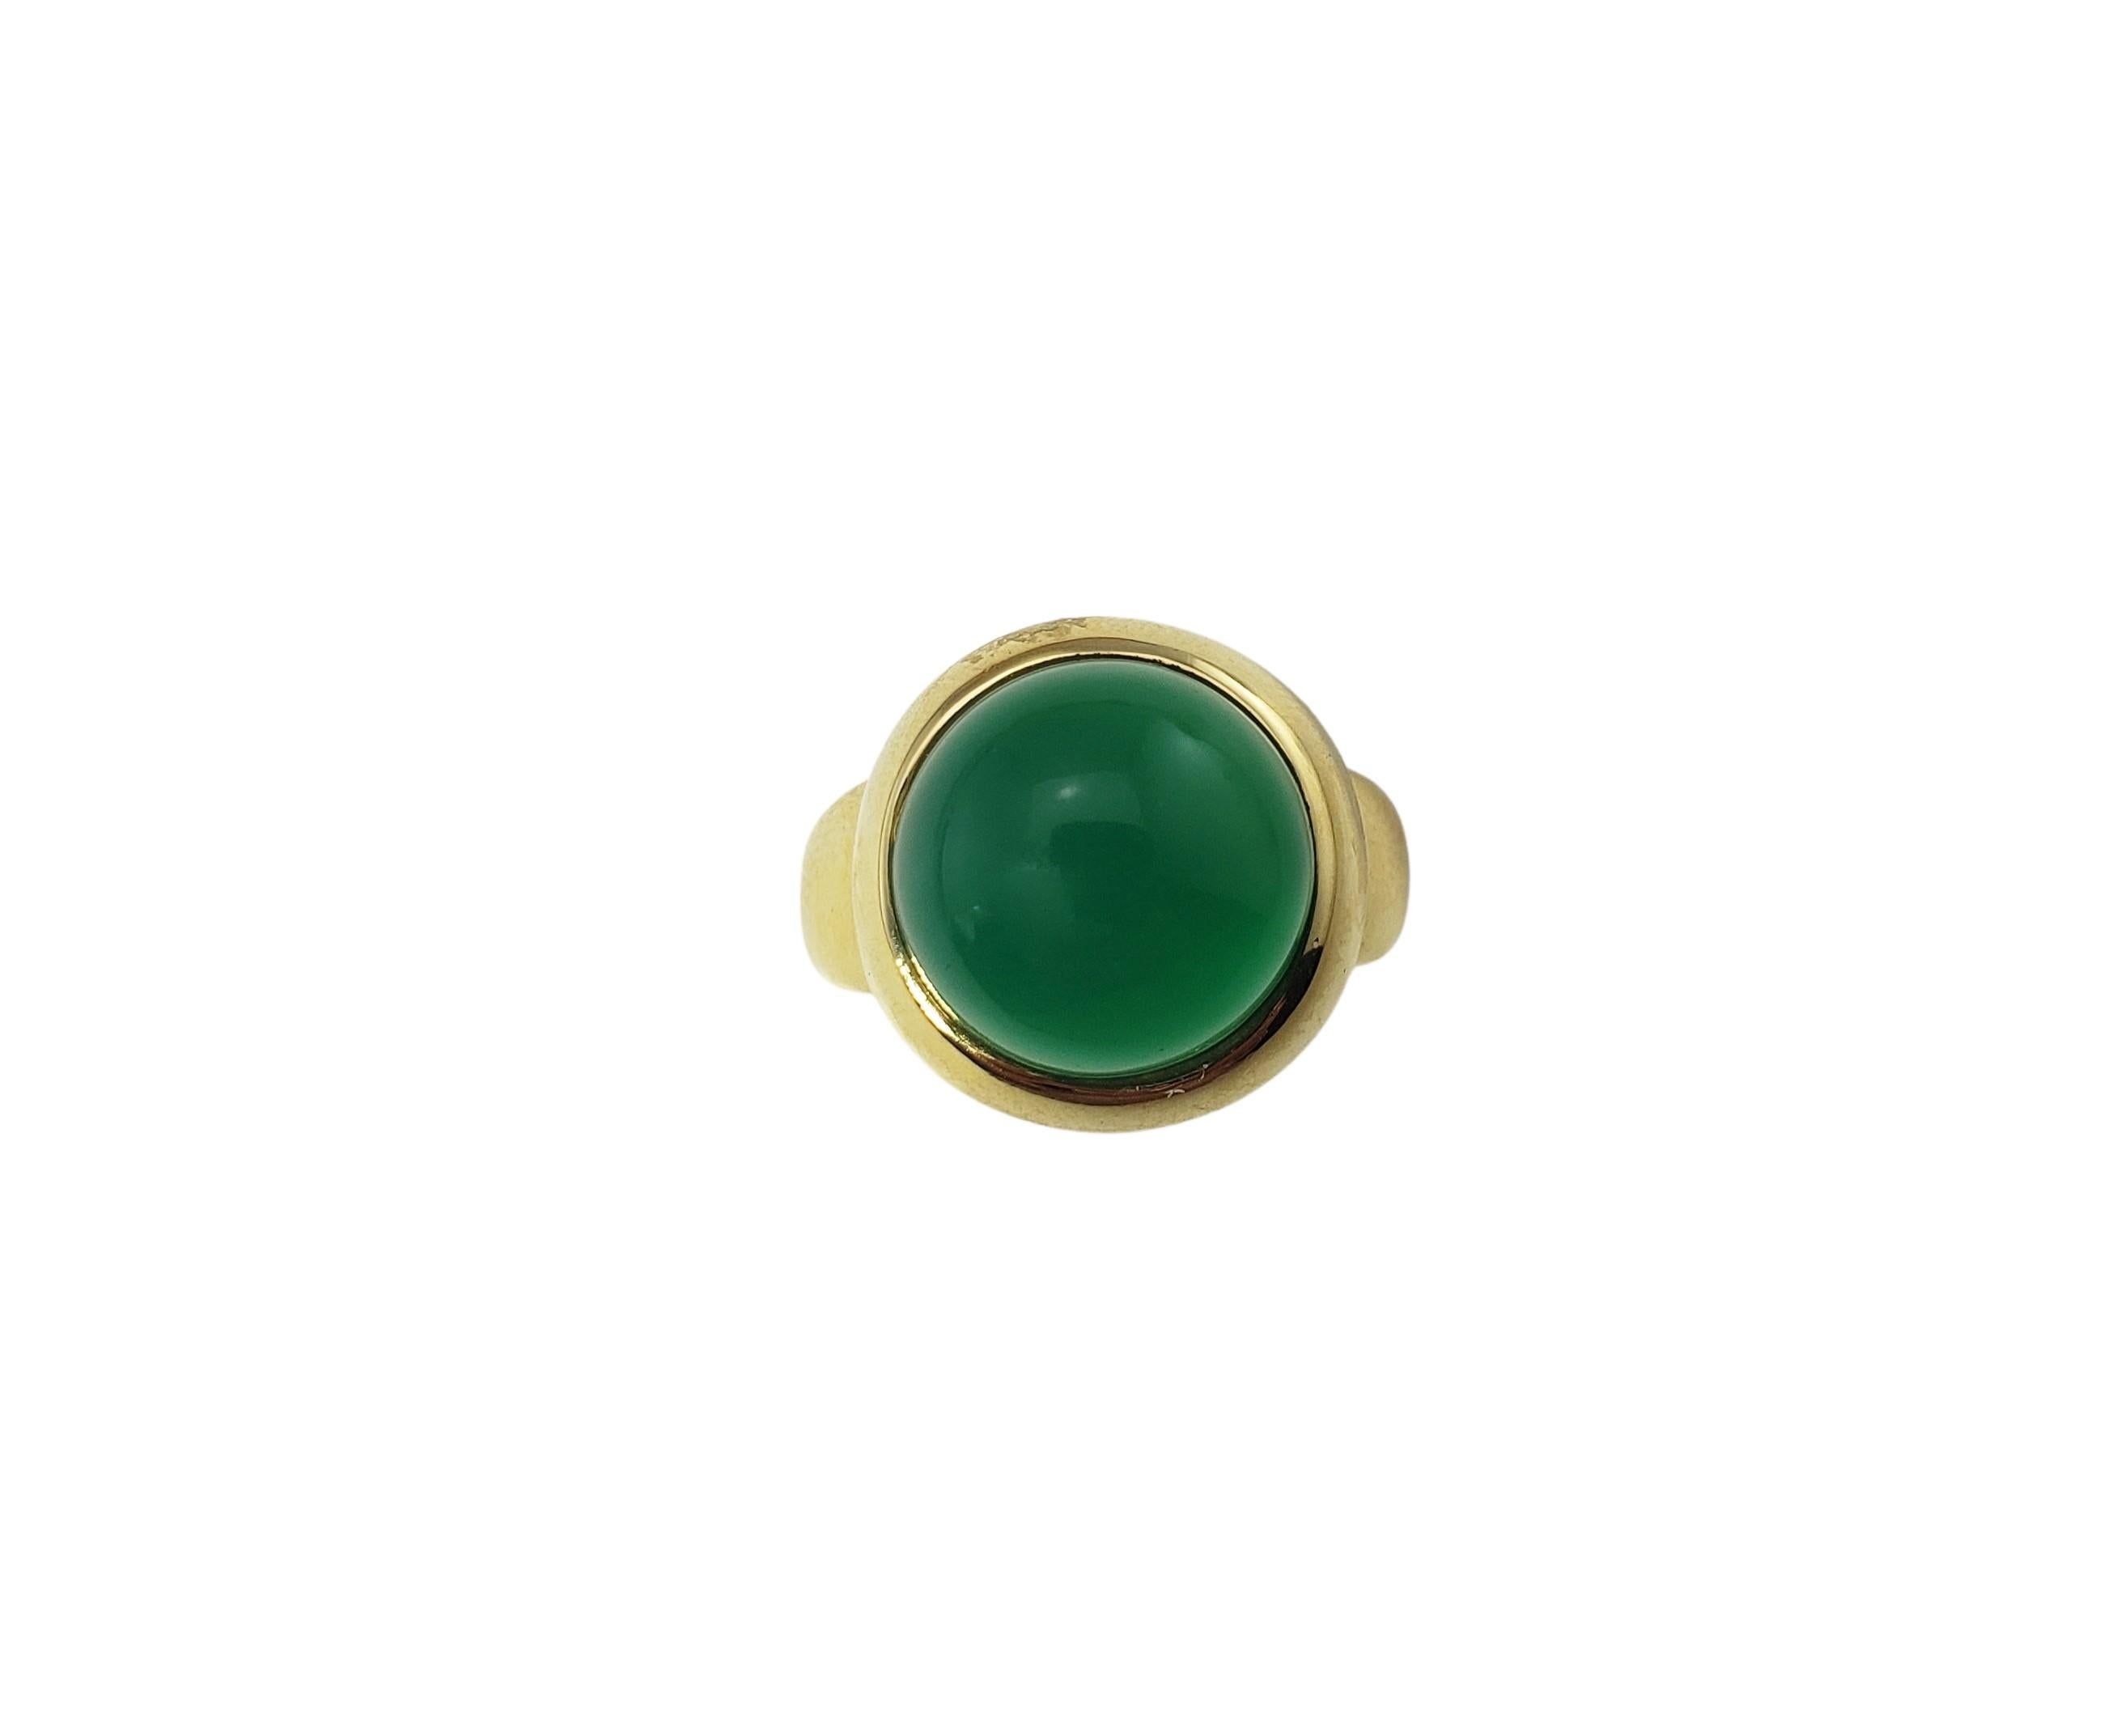 Vintage 18 Karat Yellow Gold Green Onyx Ring Size 6.5-

This elegant ring features one cabochon green onyx gemstone (12 mm) set in classic 18K yellow gold. Width: 11 mm. Shank: 4 mm.

Ring Size: 6.5

Weight: 6.8 dwt. / 10.6 gr.

Stamped: 18K 750